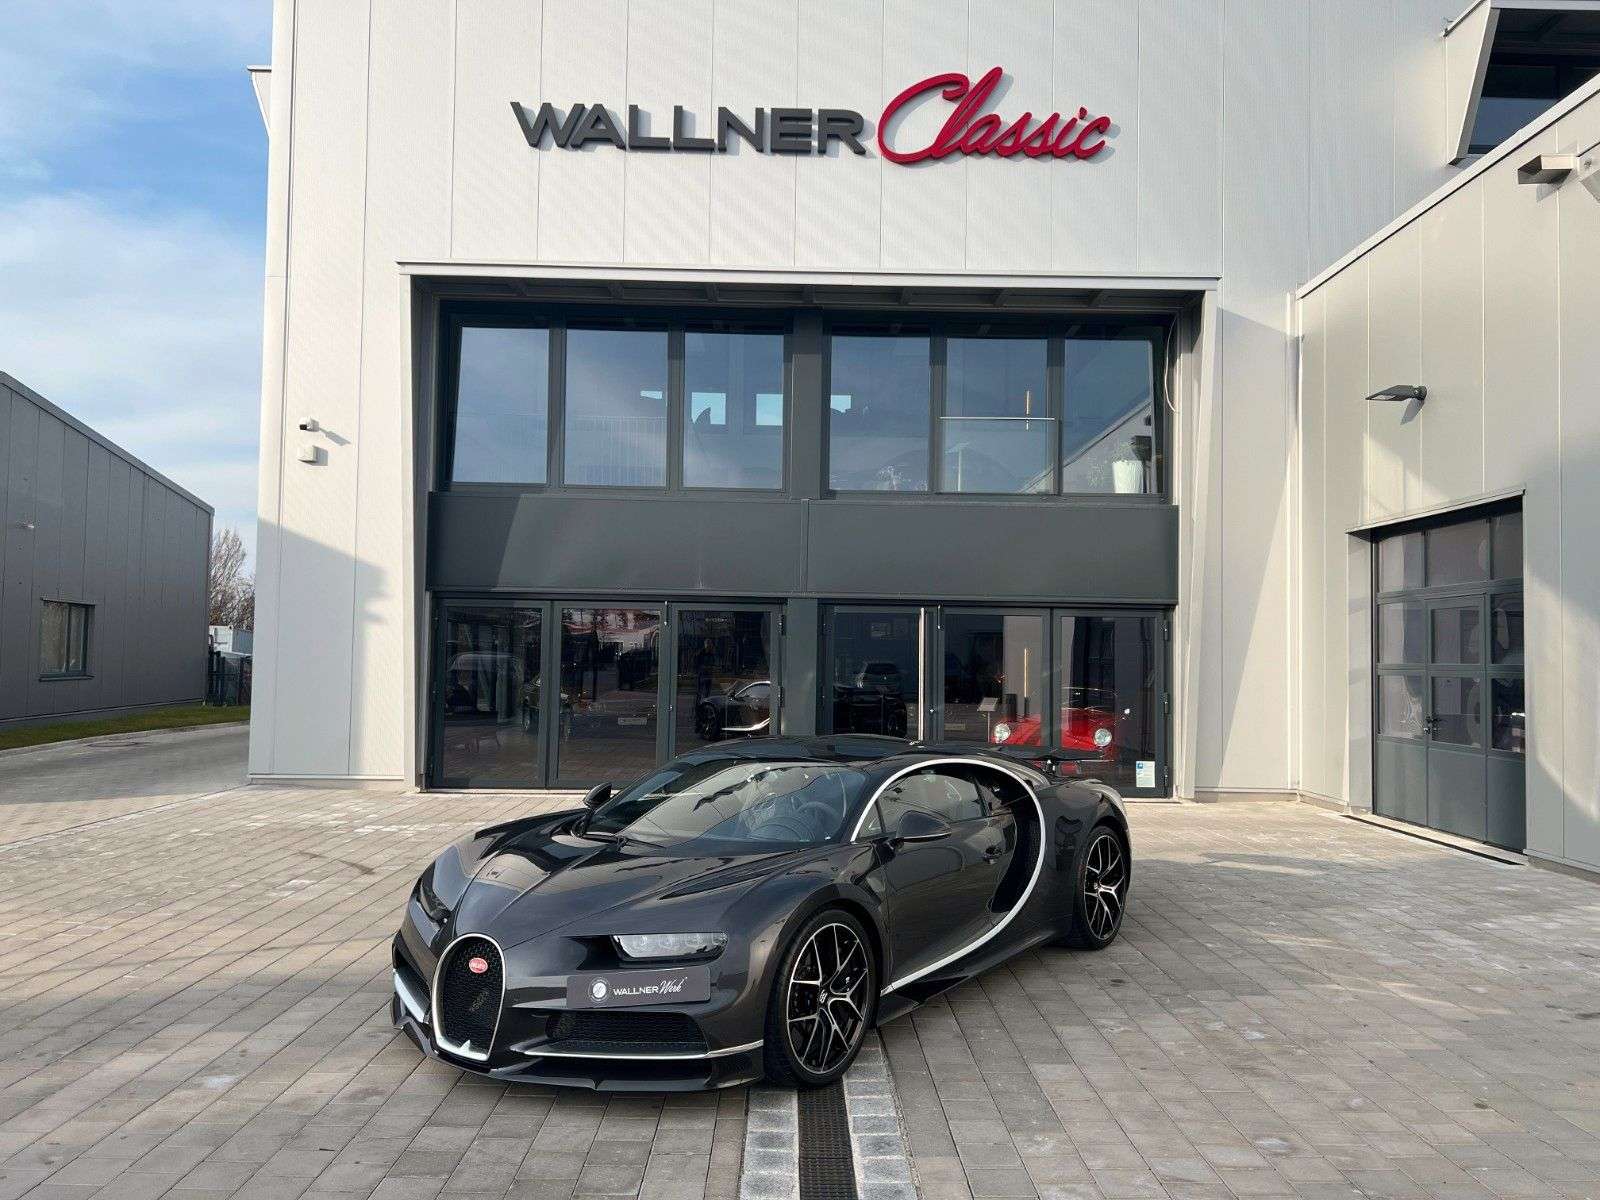 Bugatti Chiron Coupe in Grey used in Anzing for € 4,750,000.-